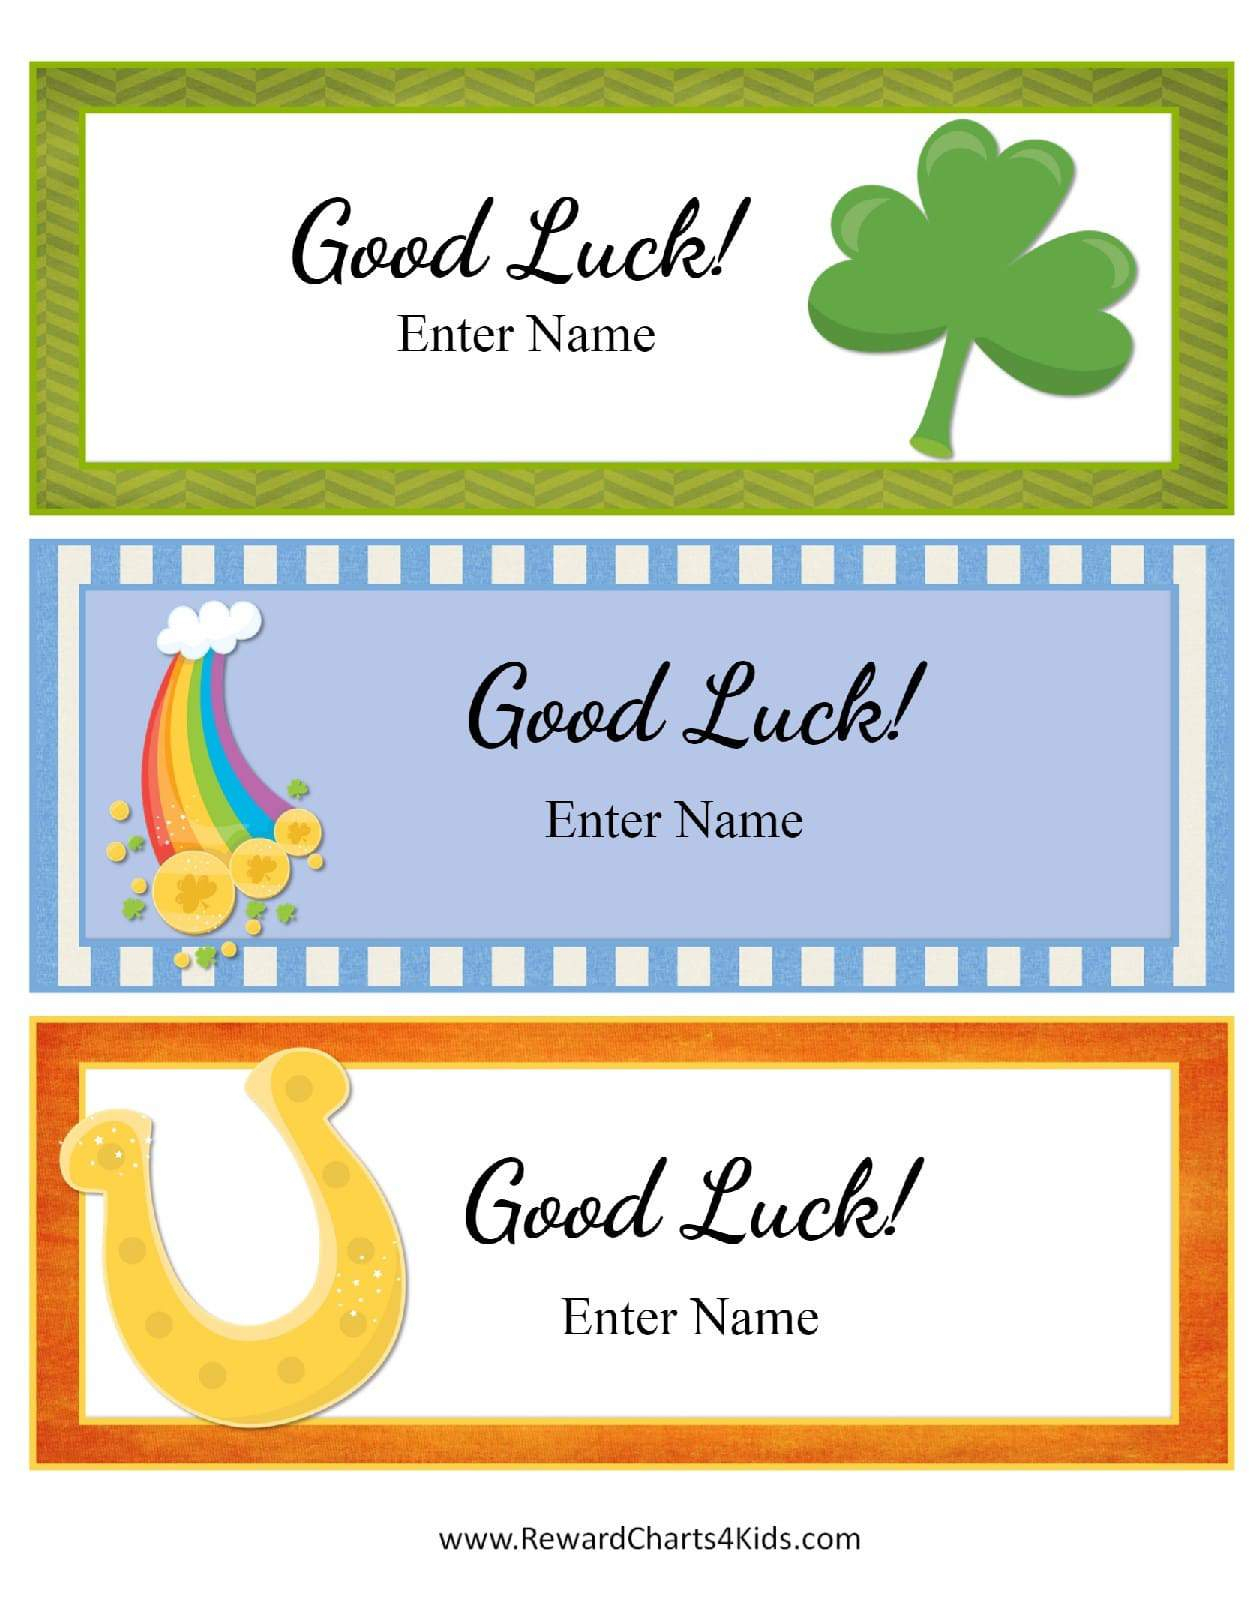 Free Good Luck Cards For Kids | Customize Online &amp;amp; Print At Home - Free Printable Good Luck Cards